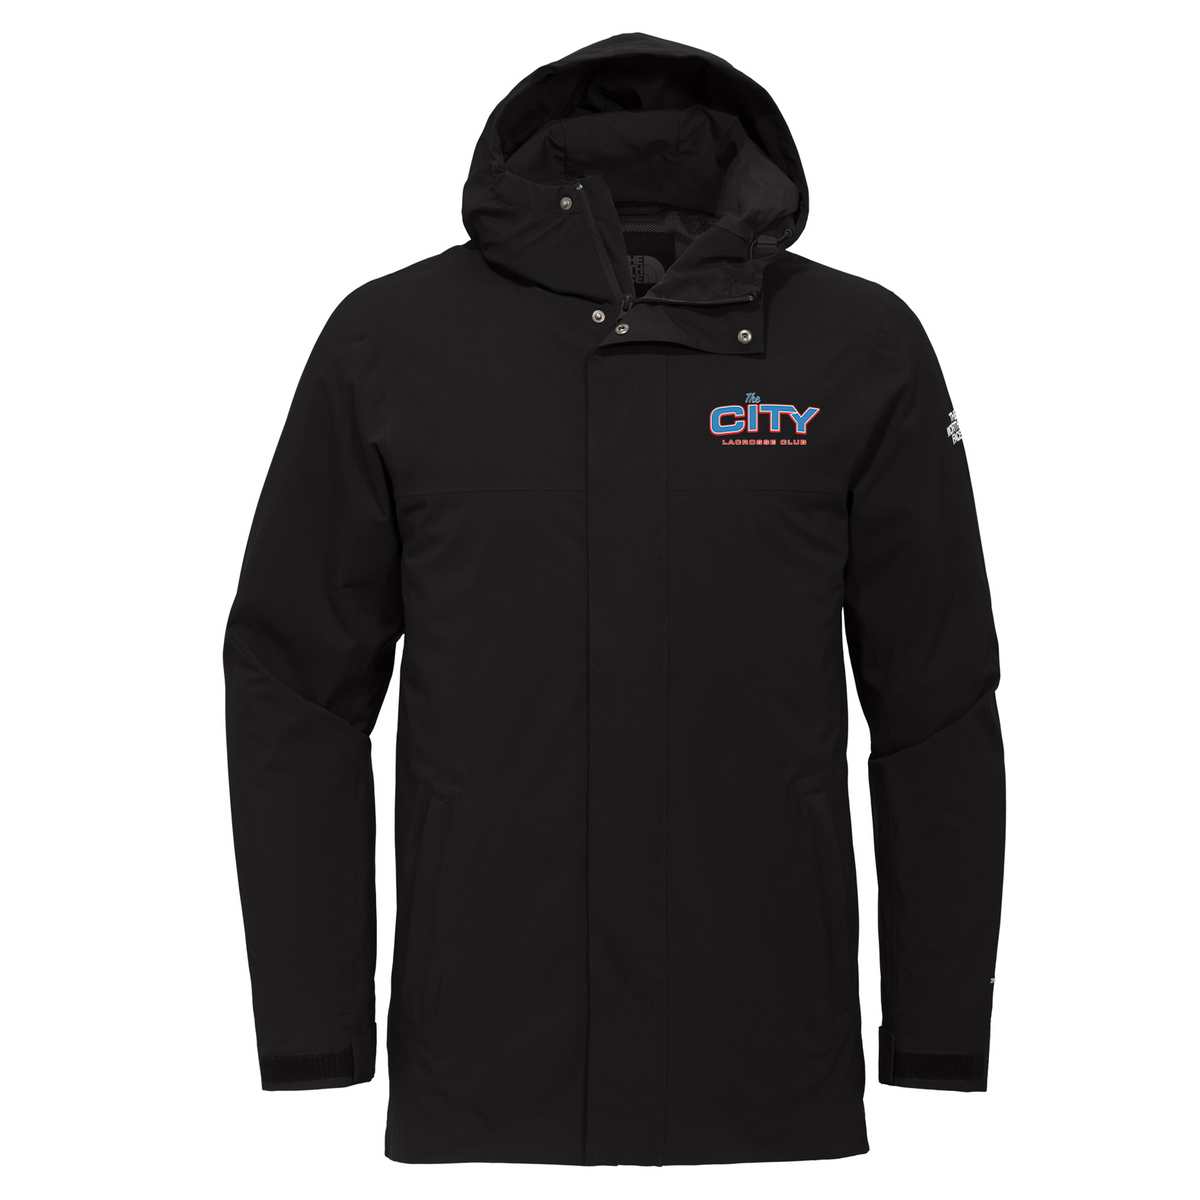 The City Lacrosse Club The North Face Parka